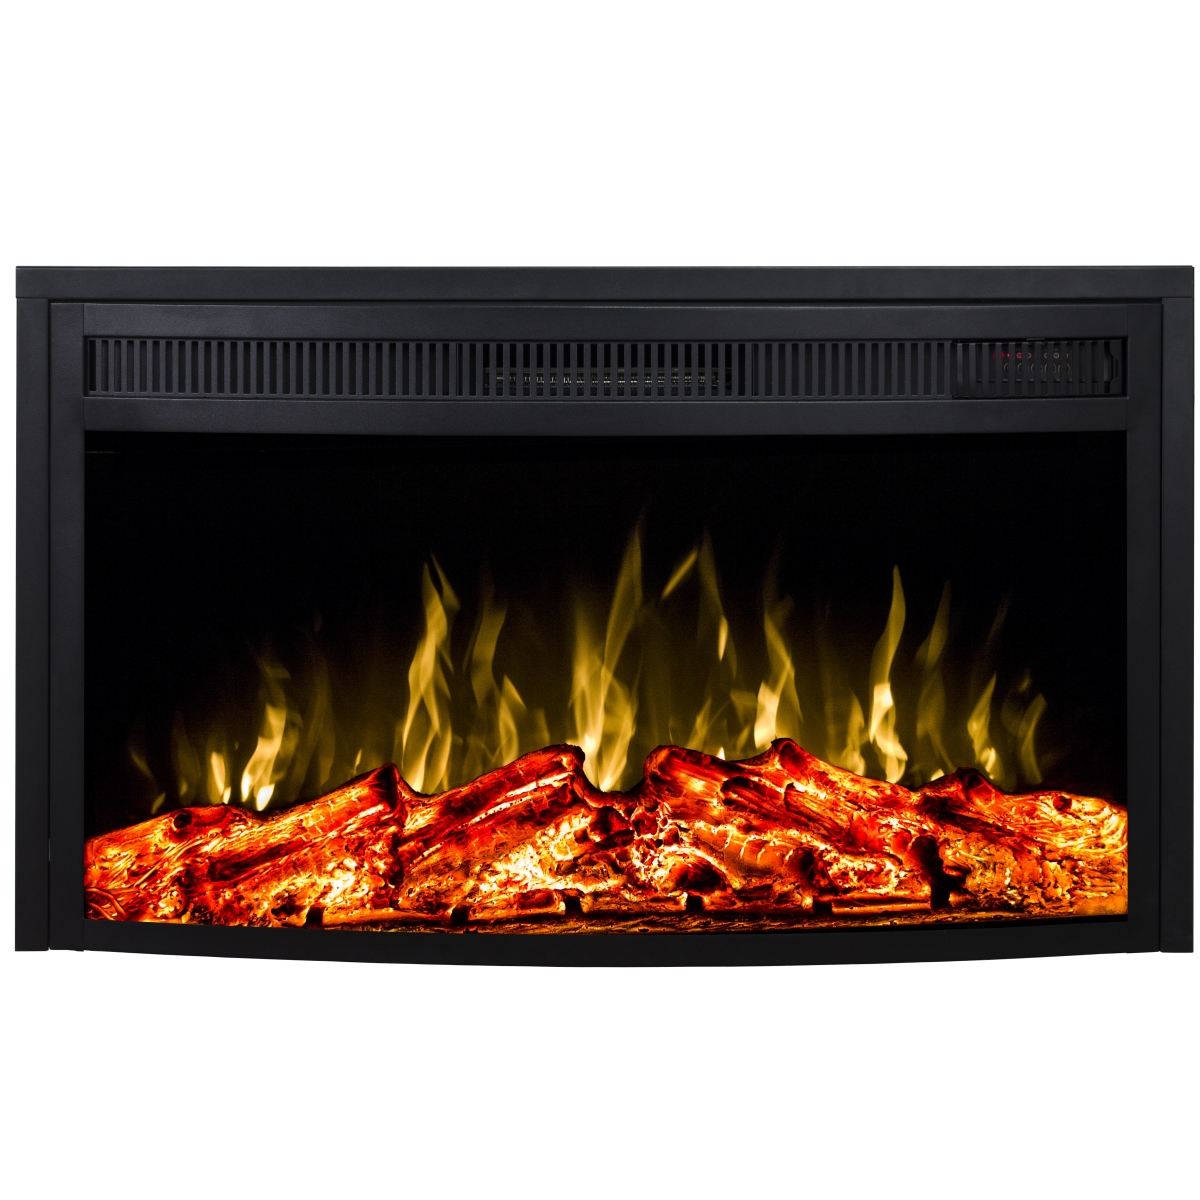 Lw2028crv-gl 28 In. Curved Ventless Heater Electric Fireplace Insert